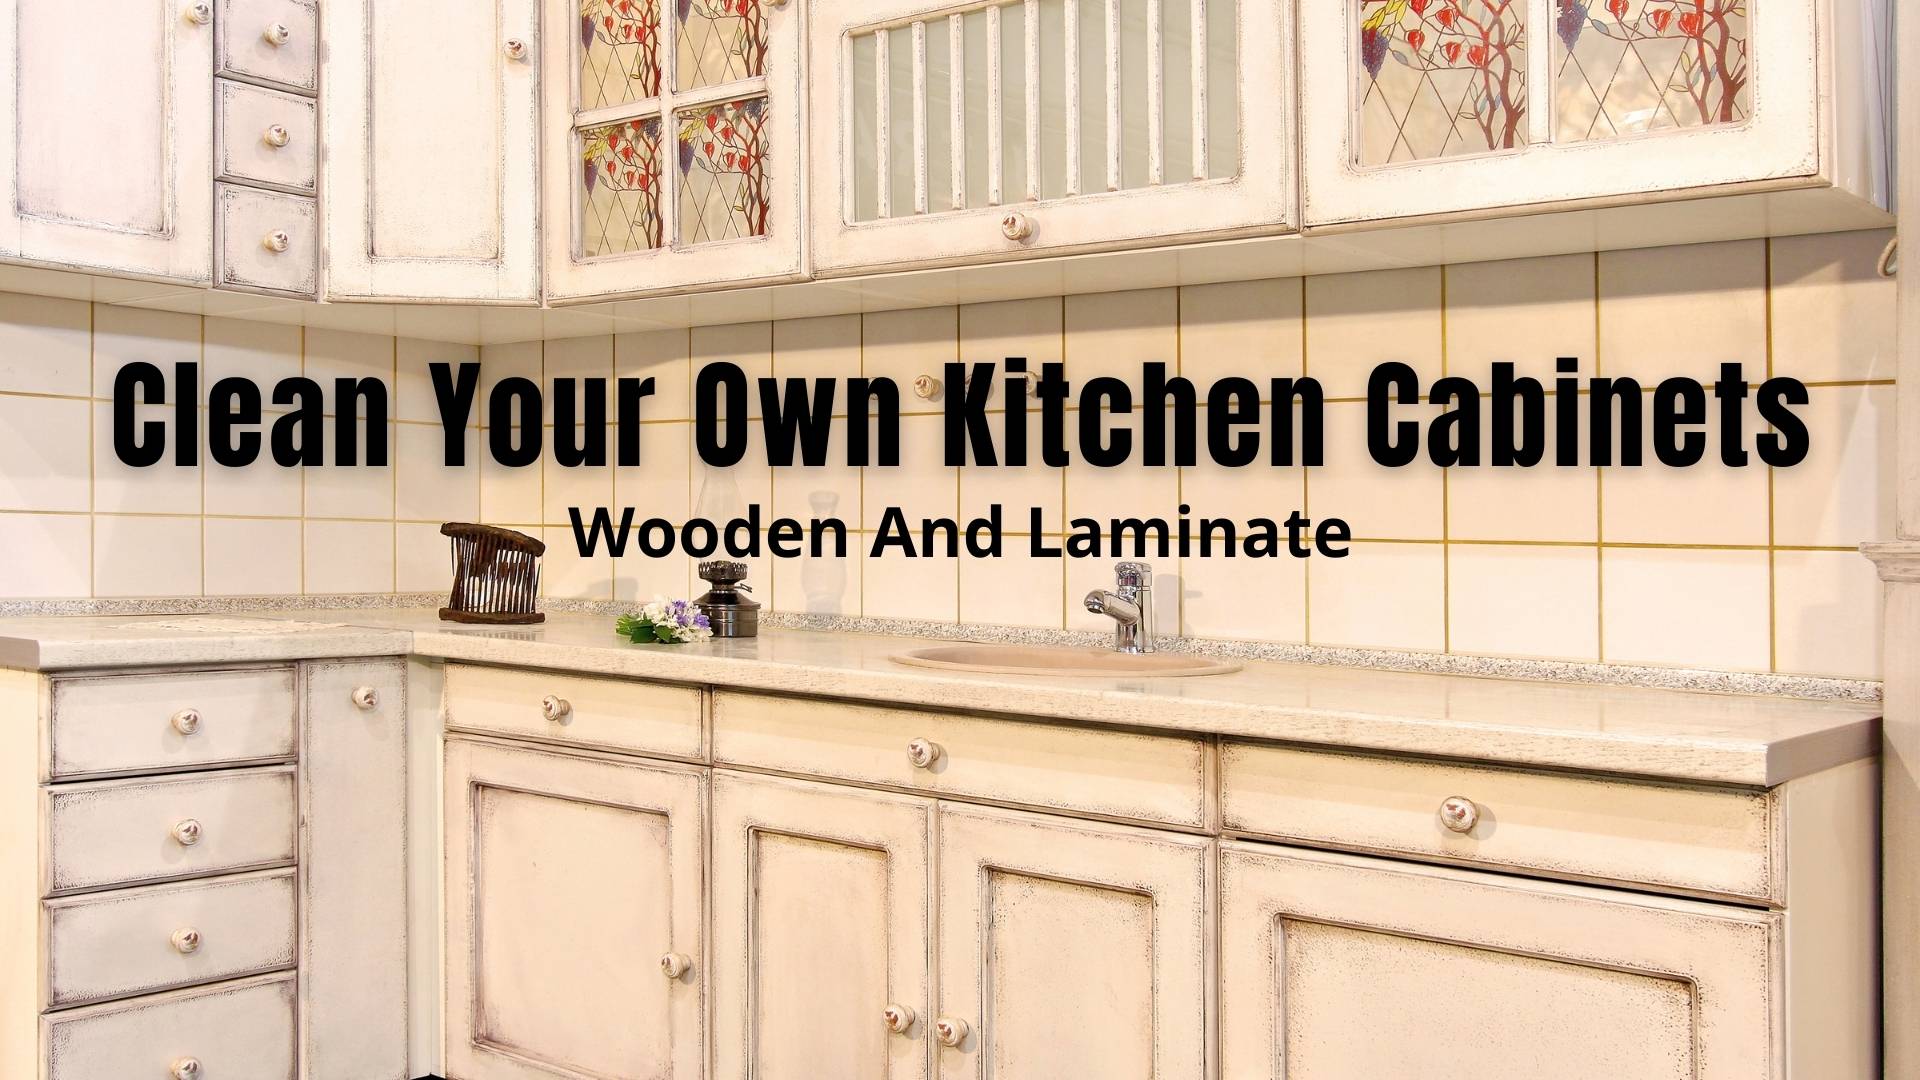 How To Clean Kitchen Cabinets Wooden, How To Clean Greasy Kitchen Cabinet Handles